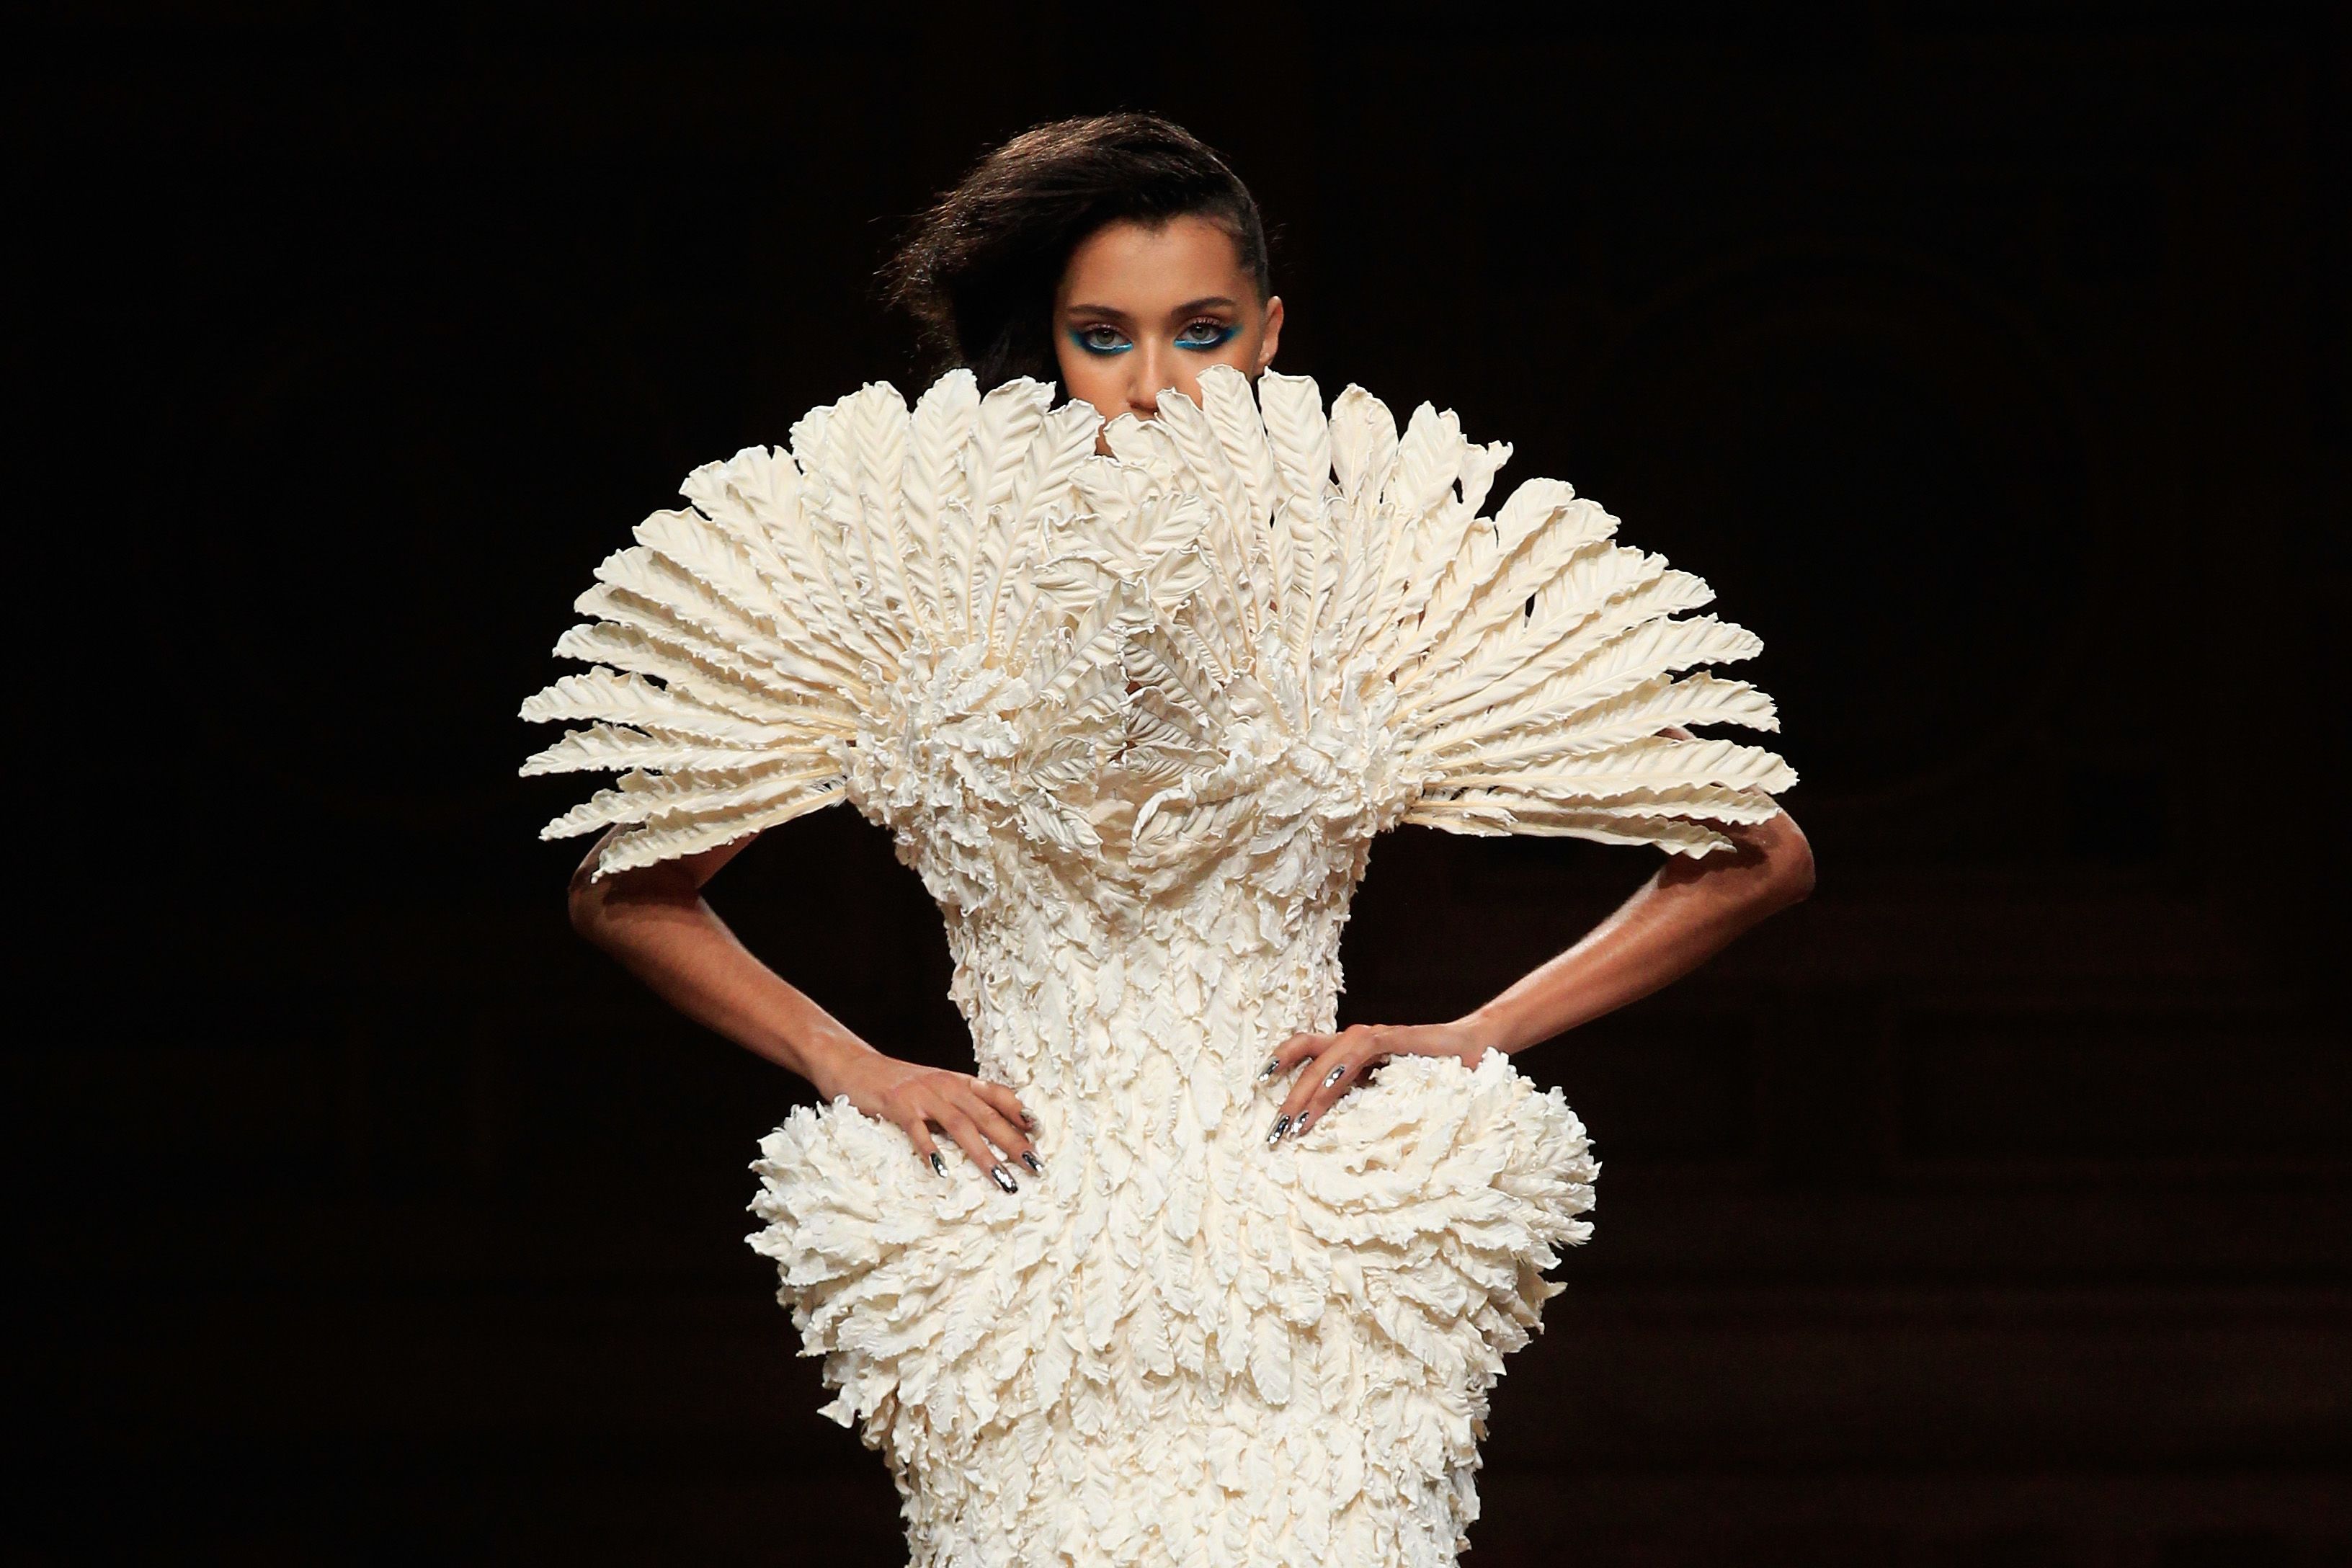 Why it matters: Haute couture